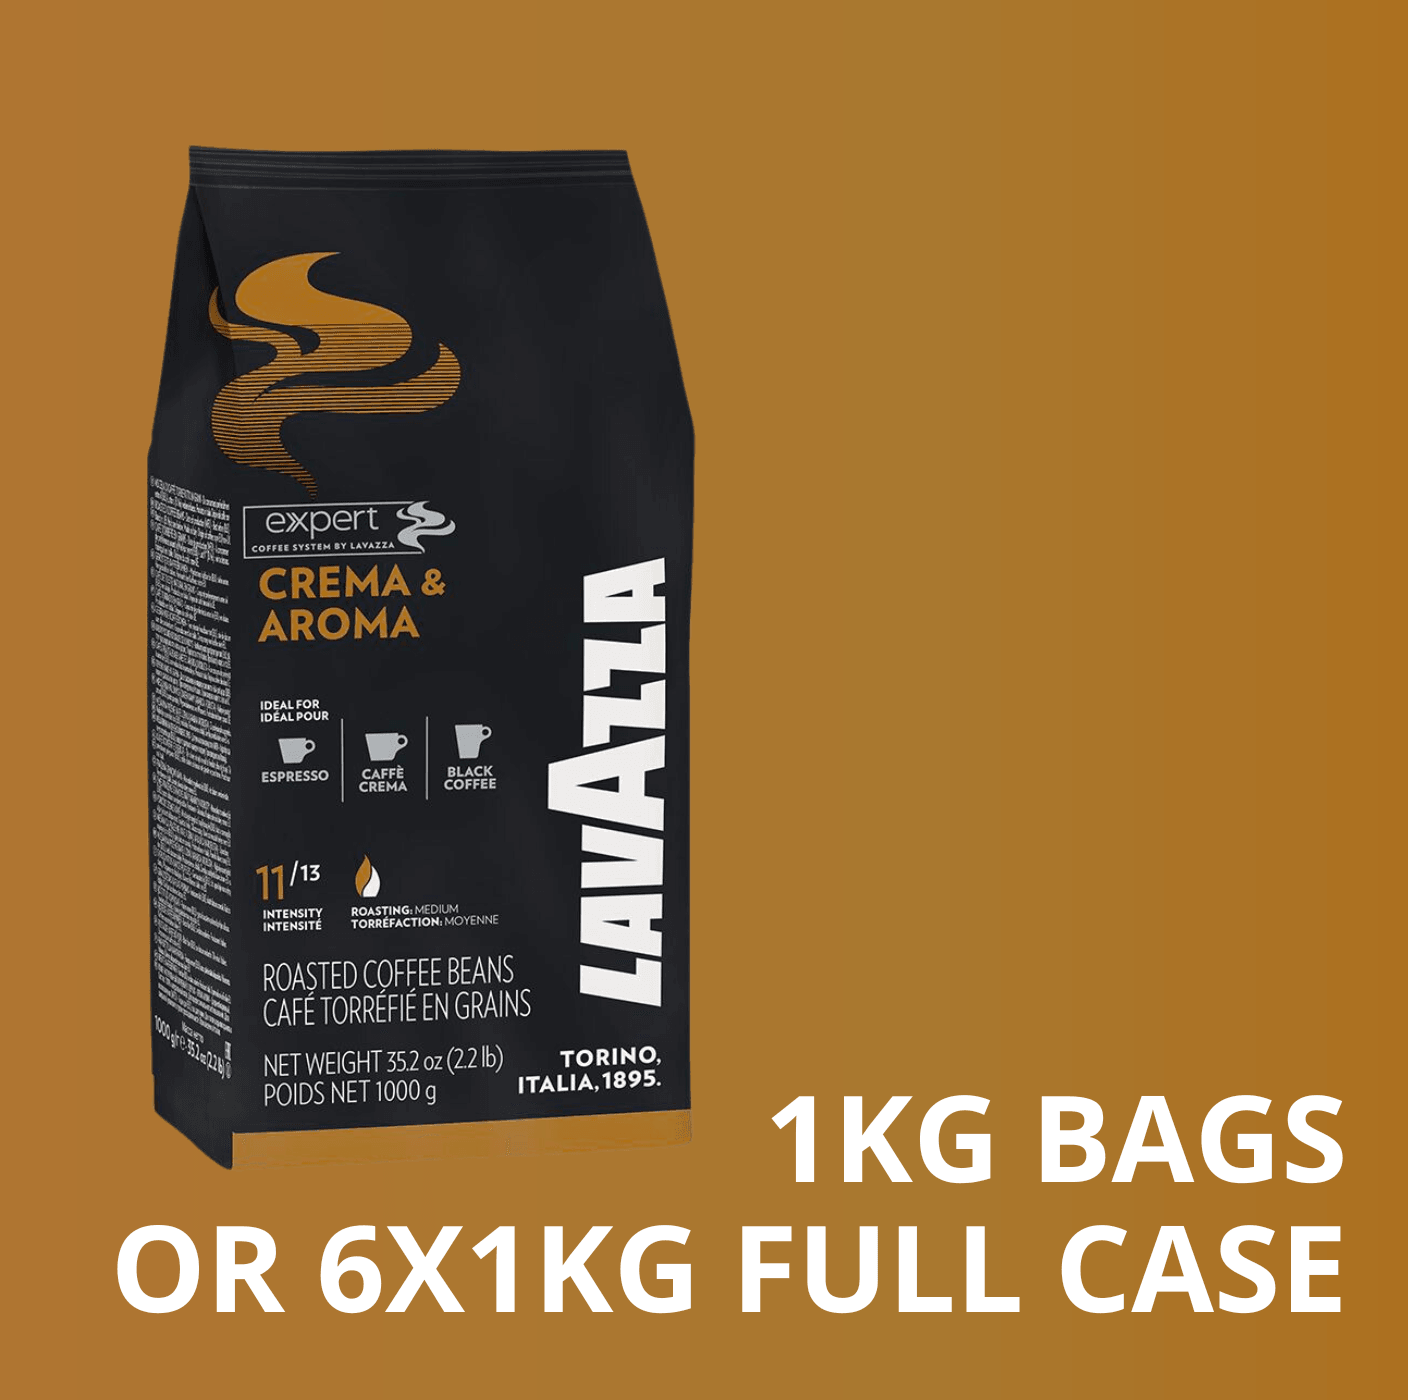 Lavazza Expert Crema & Aroma Coffee Beans (1kg Bags or Full Case) - Vending Superstore